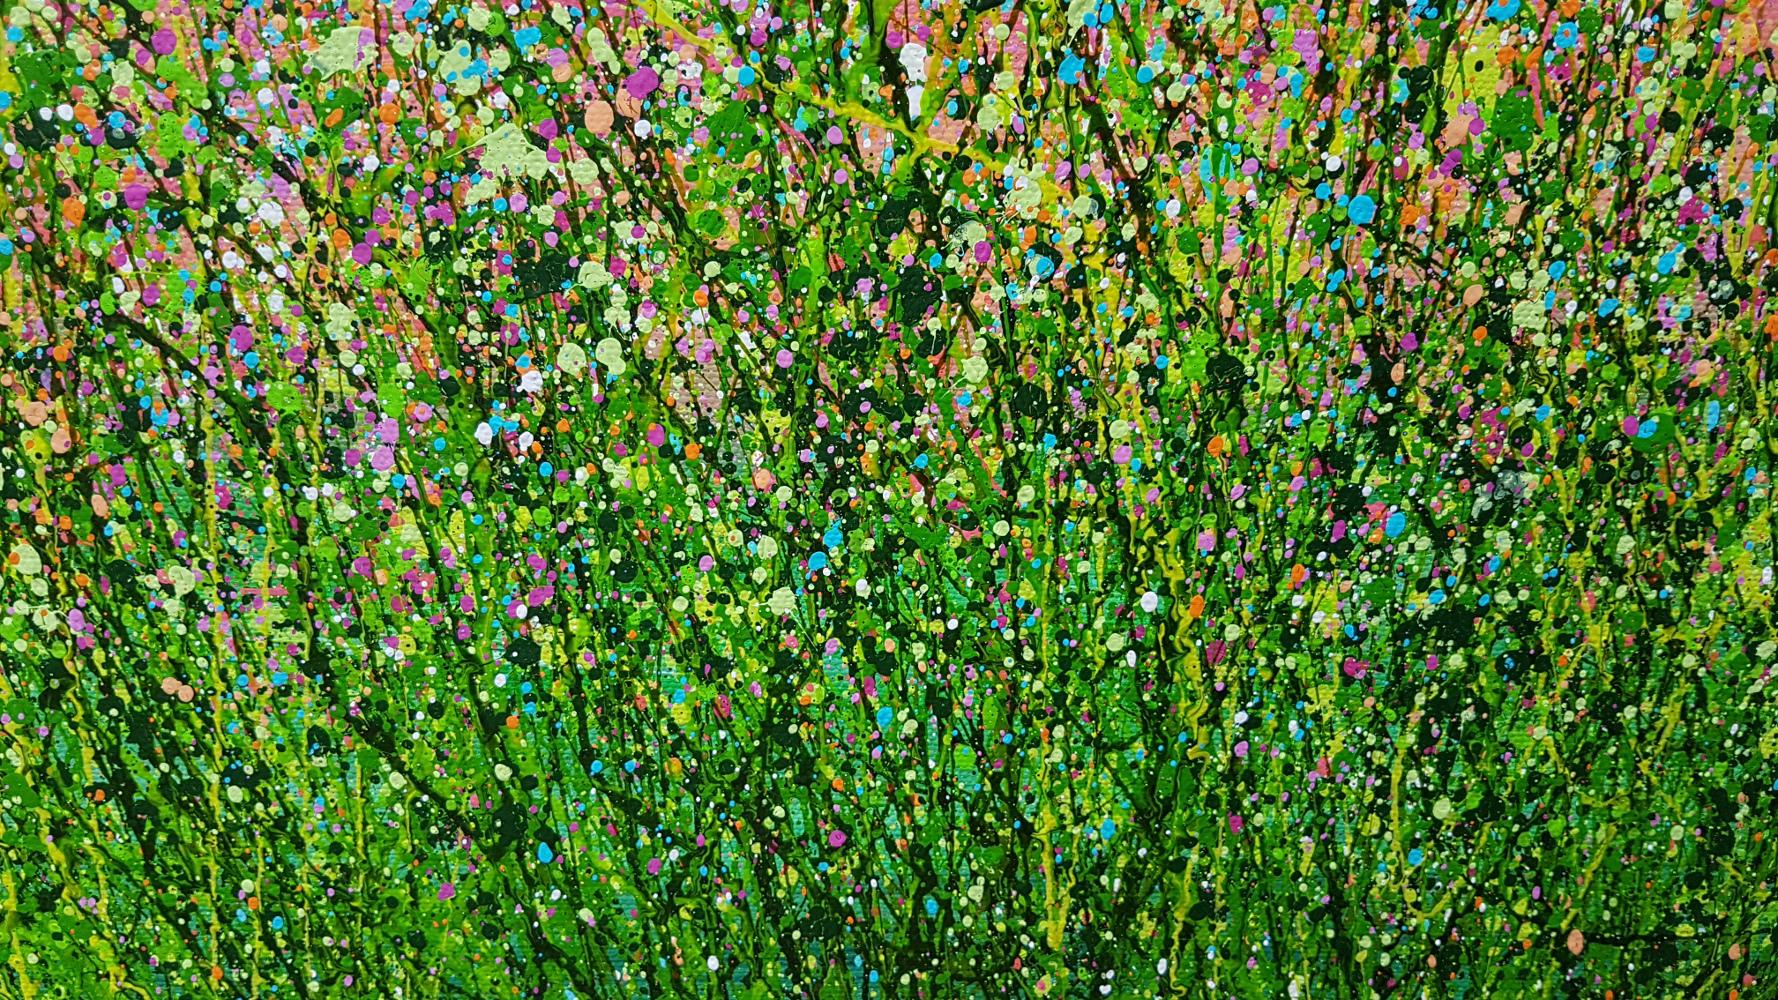 Once Upon A Paradise #2 – By Lucy Moore [2022]
original and hand signed by the artist 
Acrylic on canvas
Image size: H:60 cm x W:60 cm
Complete Size of Unframed Work: H:60 cm x W:60 cm x D:1.5cm
Sold Unframed
Please note that insitu images are